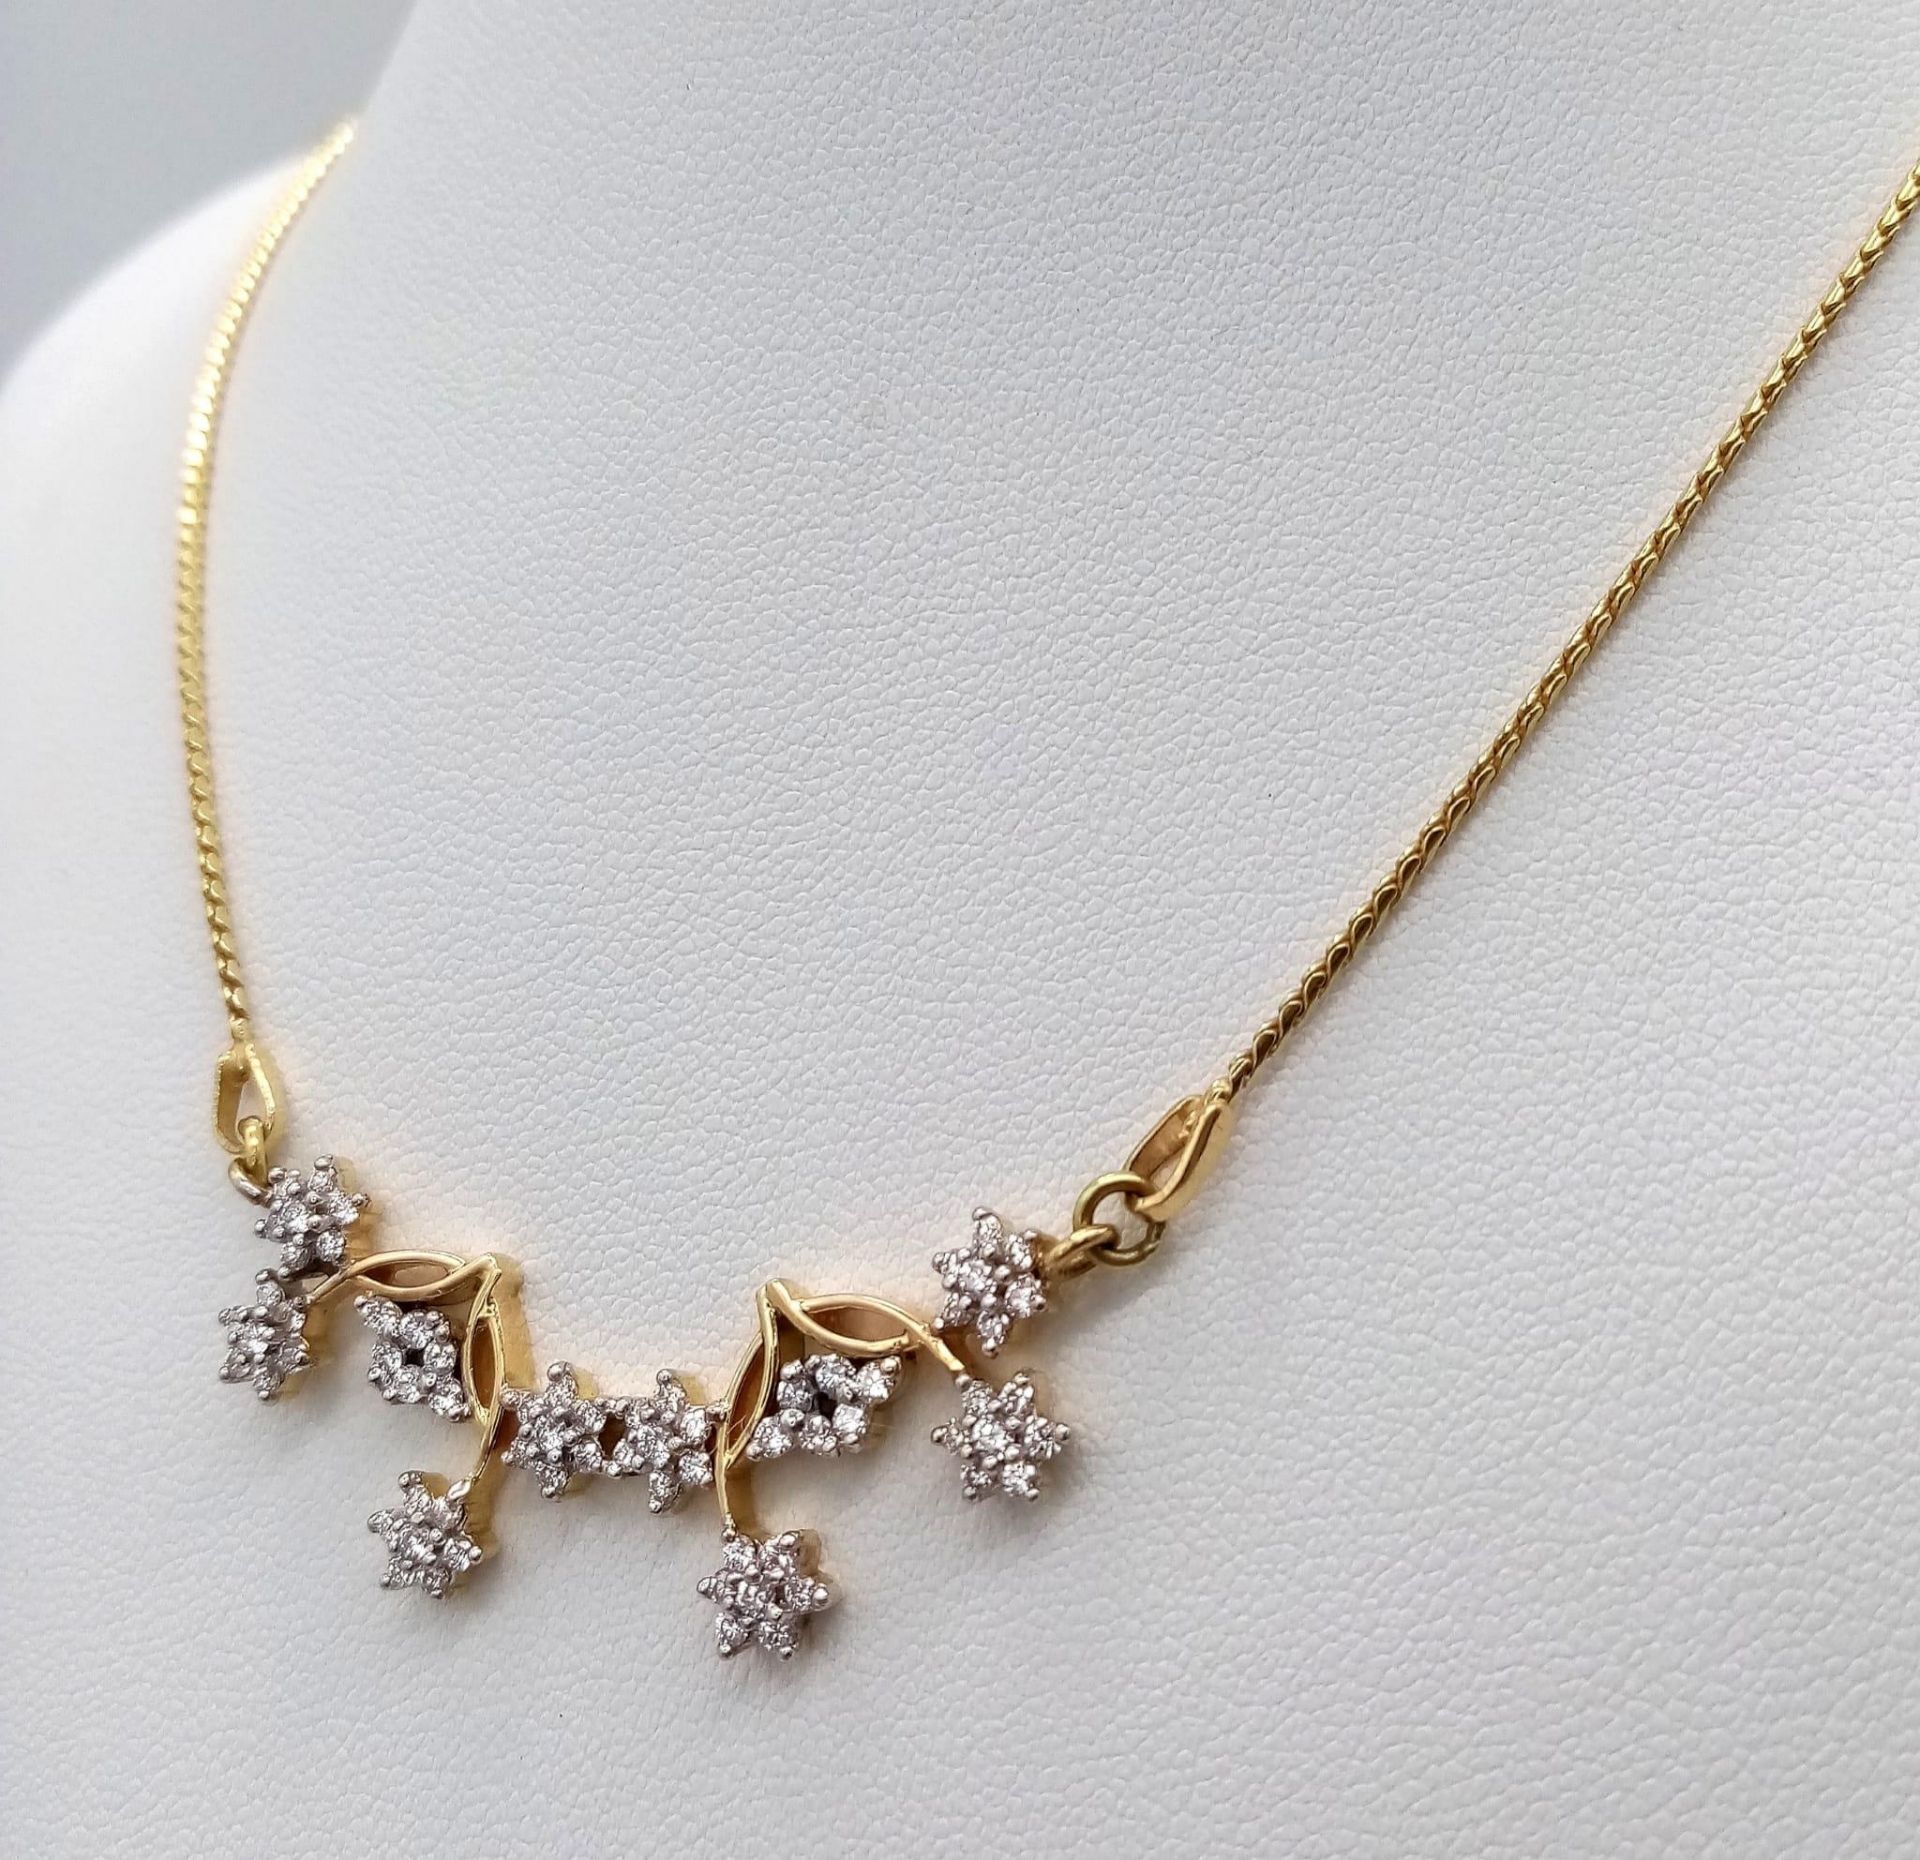 An elegant 18 K yellow gold necklace with with a flower design loaded with diamonds (0.70 carats), - Image 2 of 4